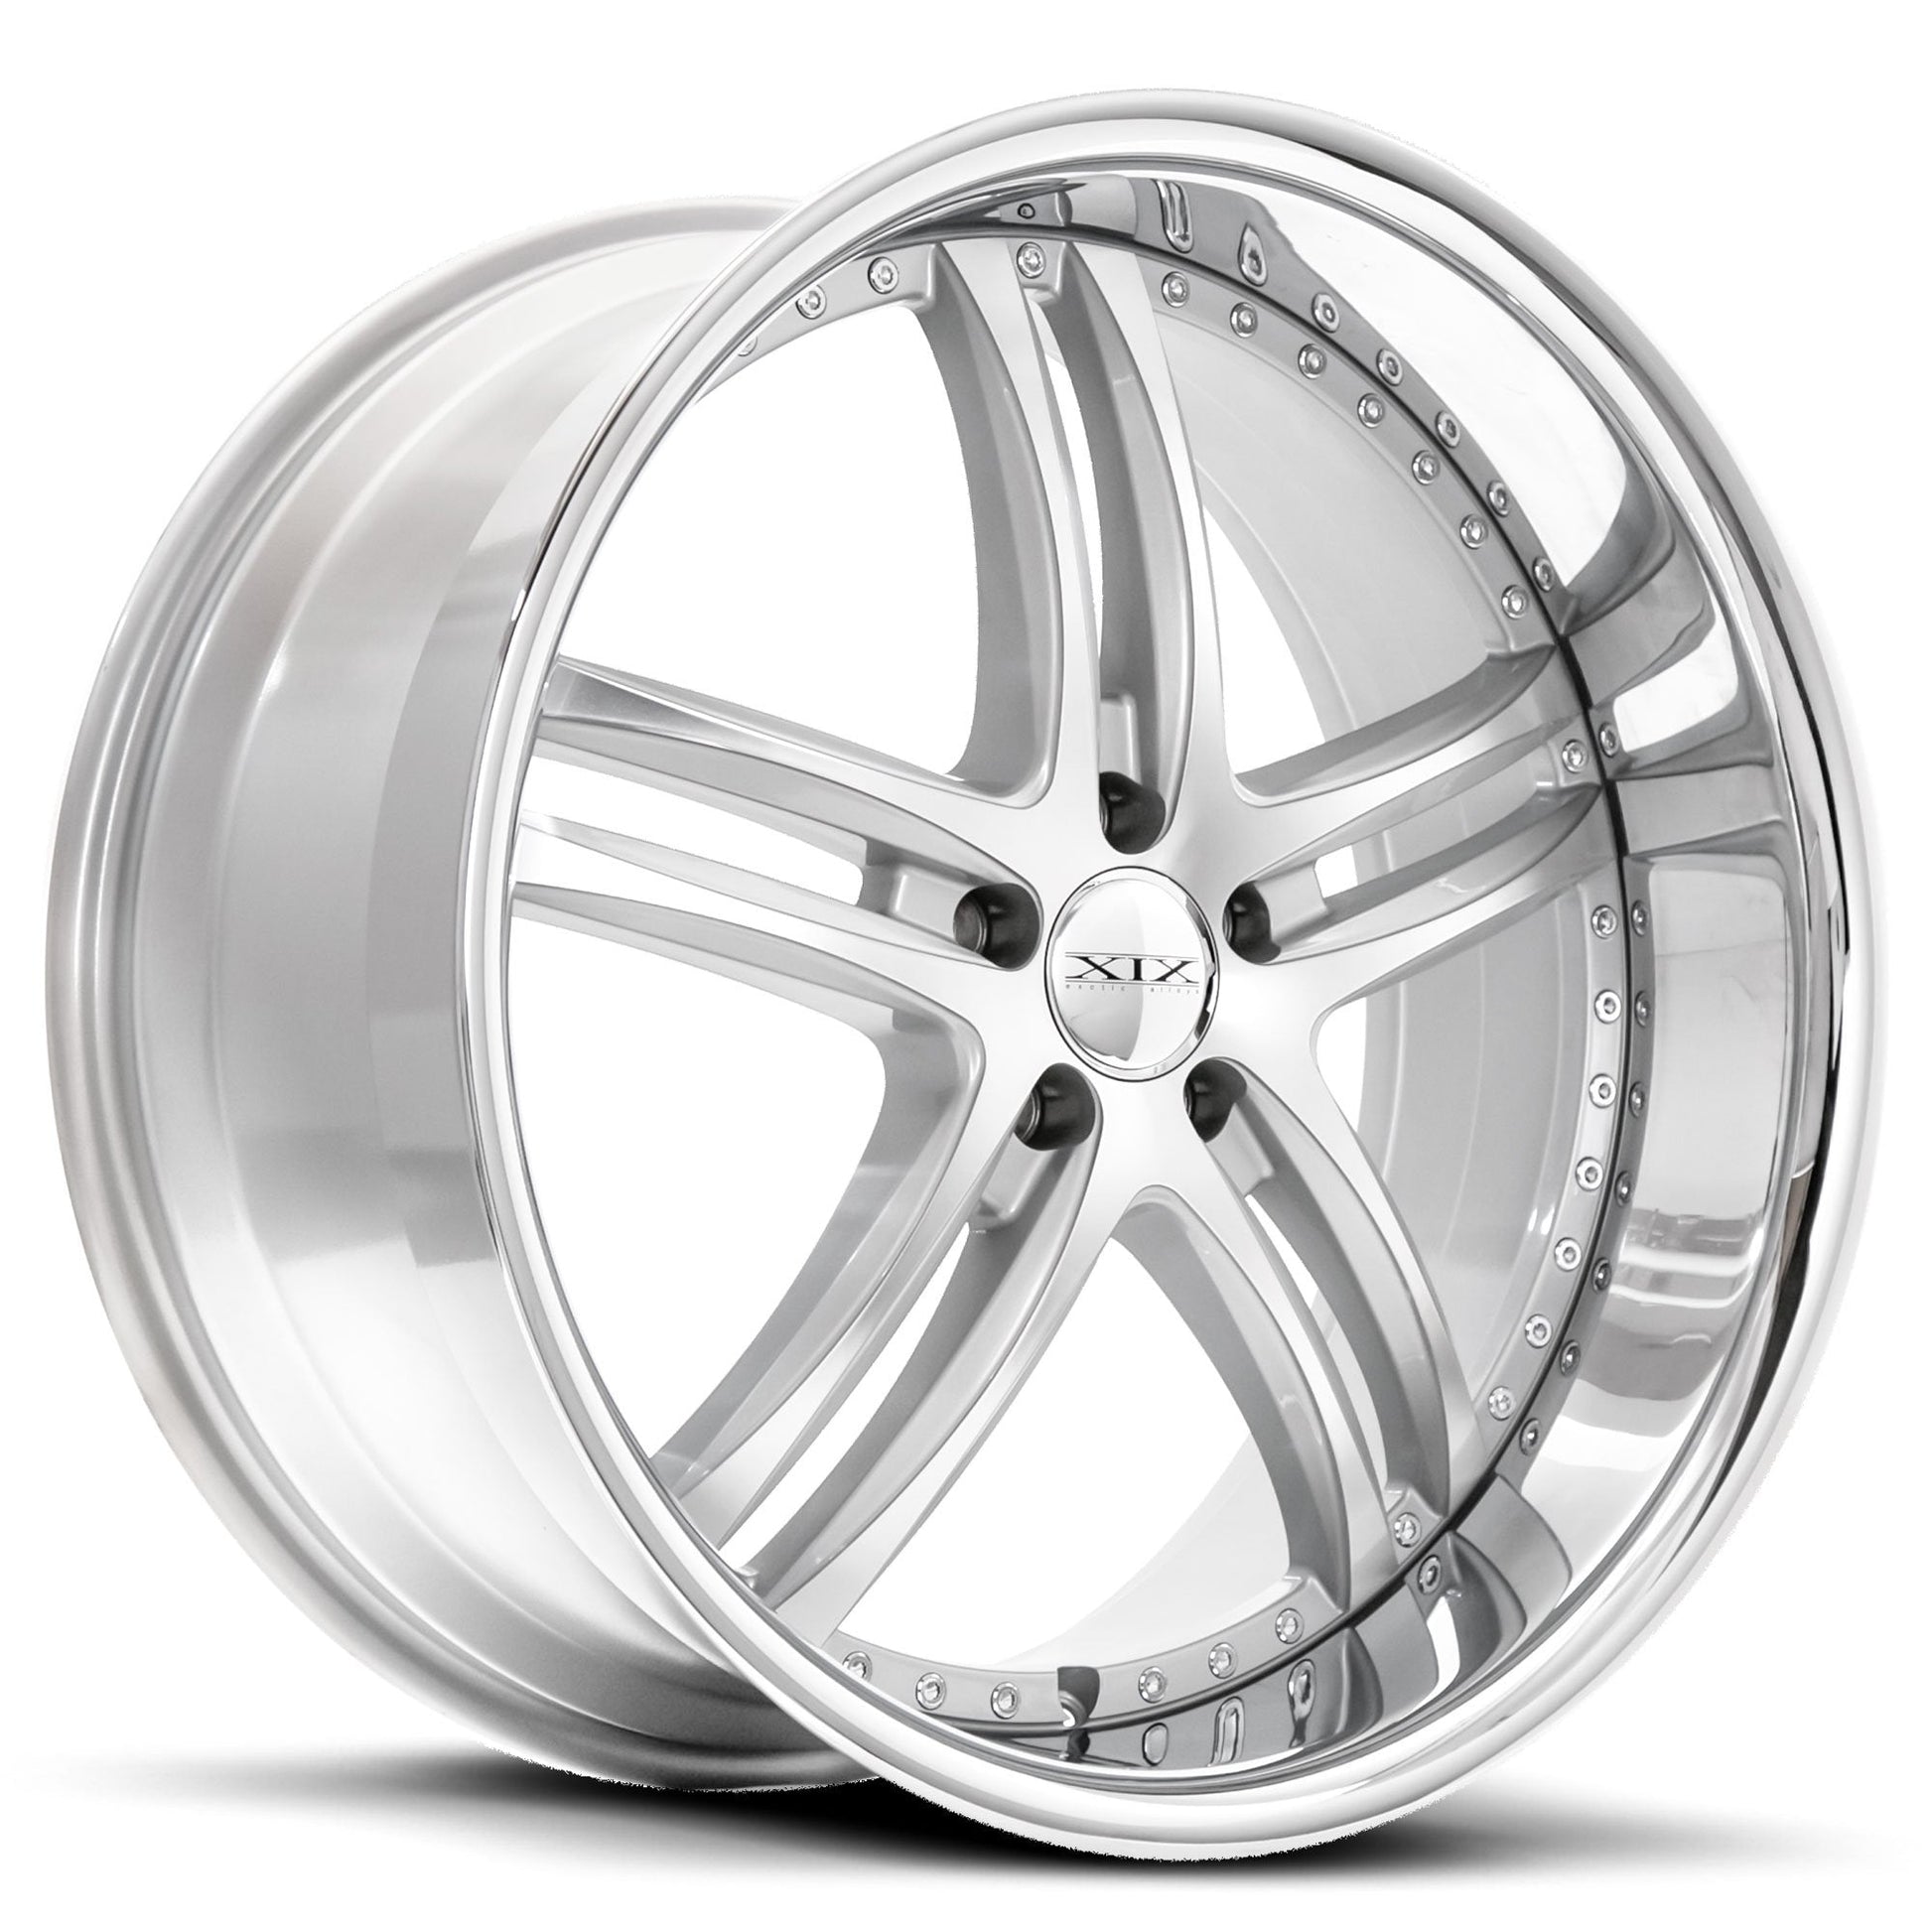 XIX-X15-Silver-Machined-with-Stainless-Steel-Lip-Silver-20x10-73.1-wheels-rims-felger-Felghuset